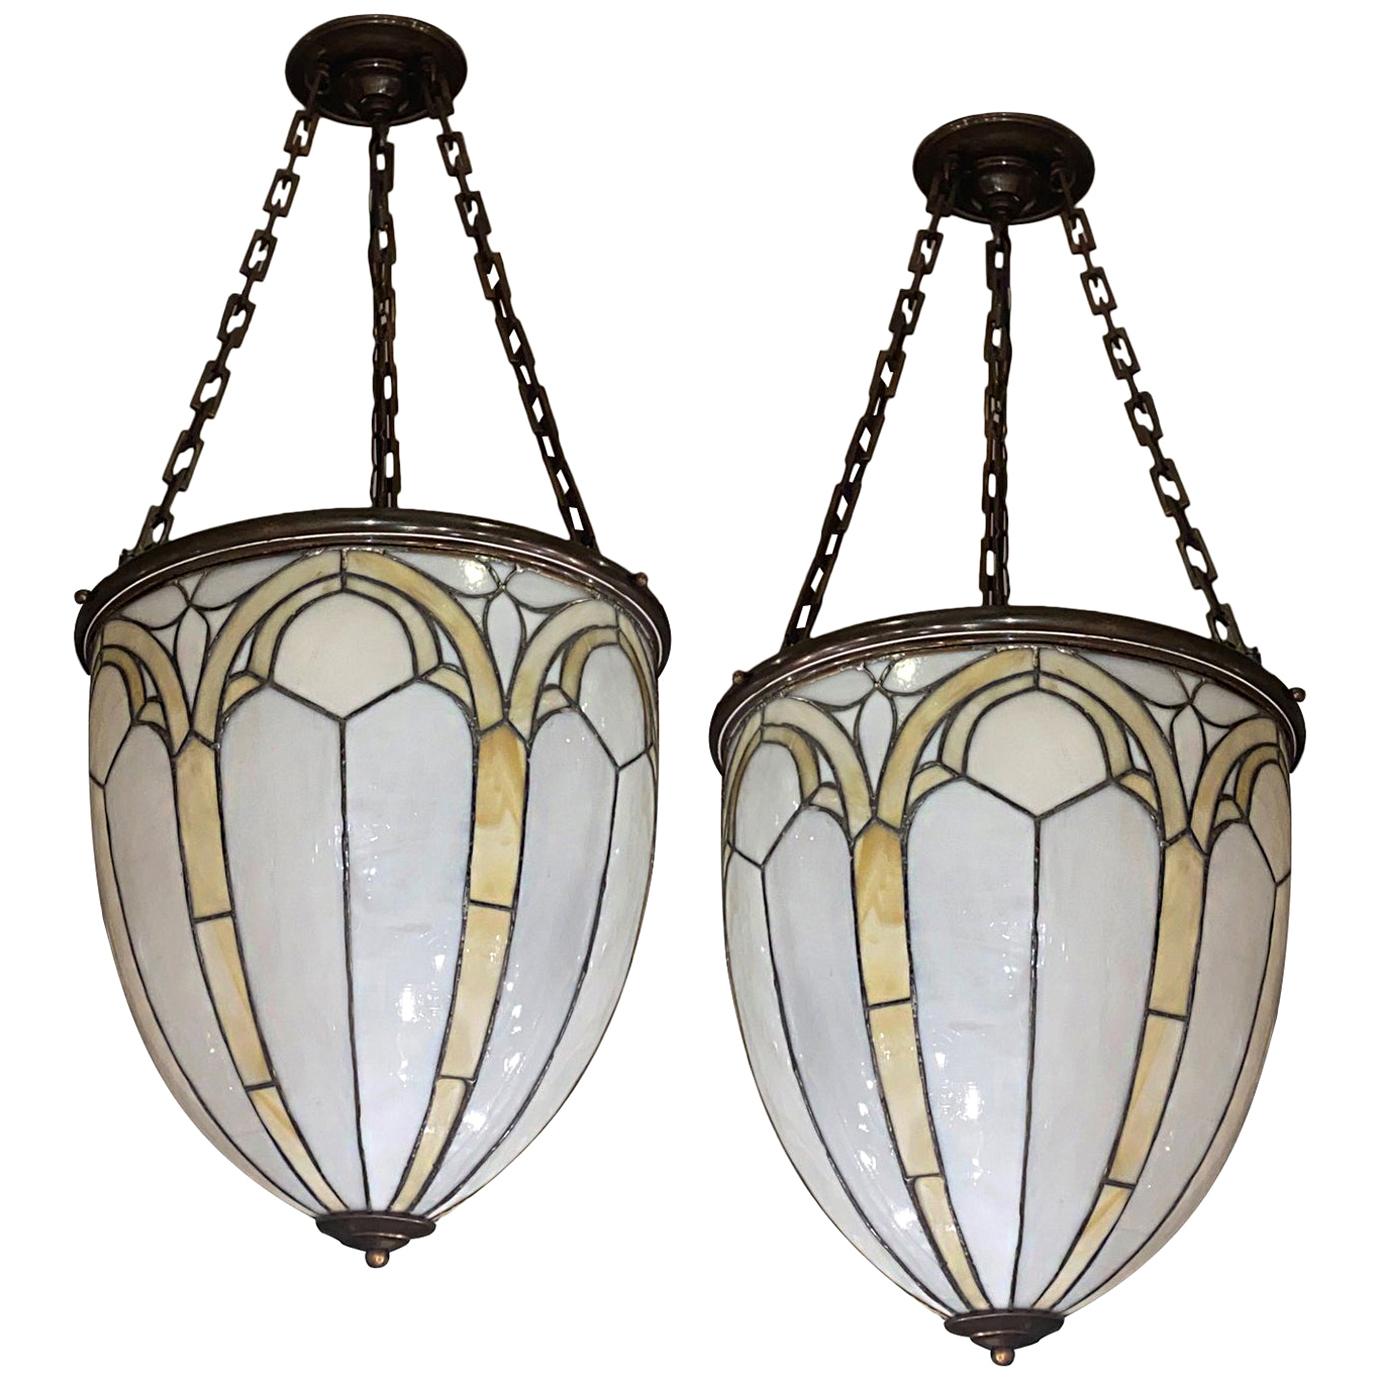 Pair of English Leaded Glass Lanterns. Sold individually